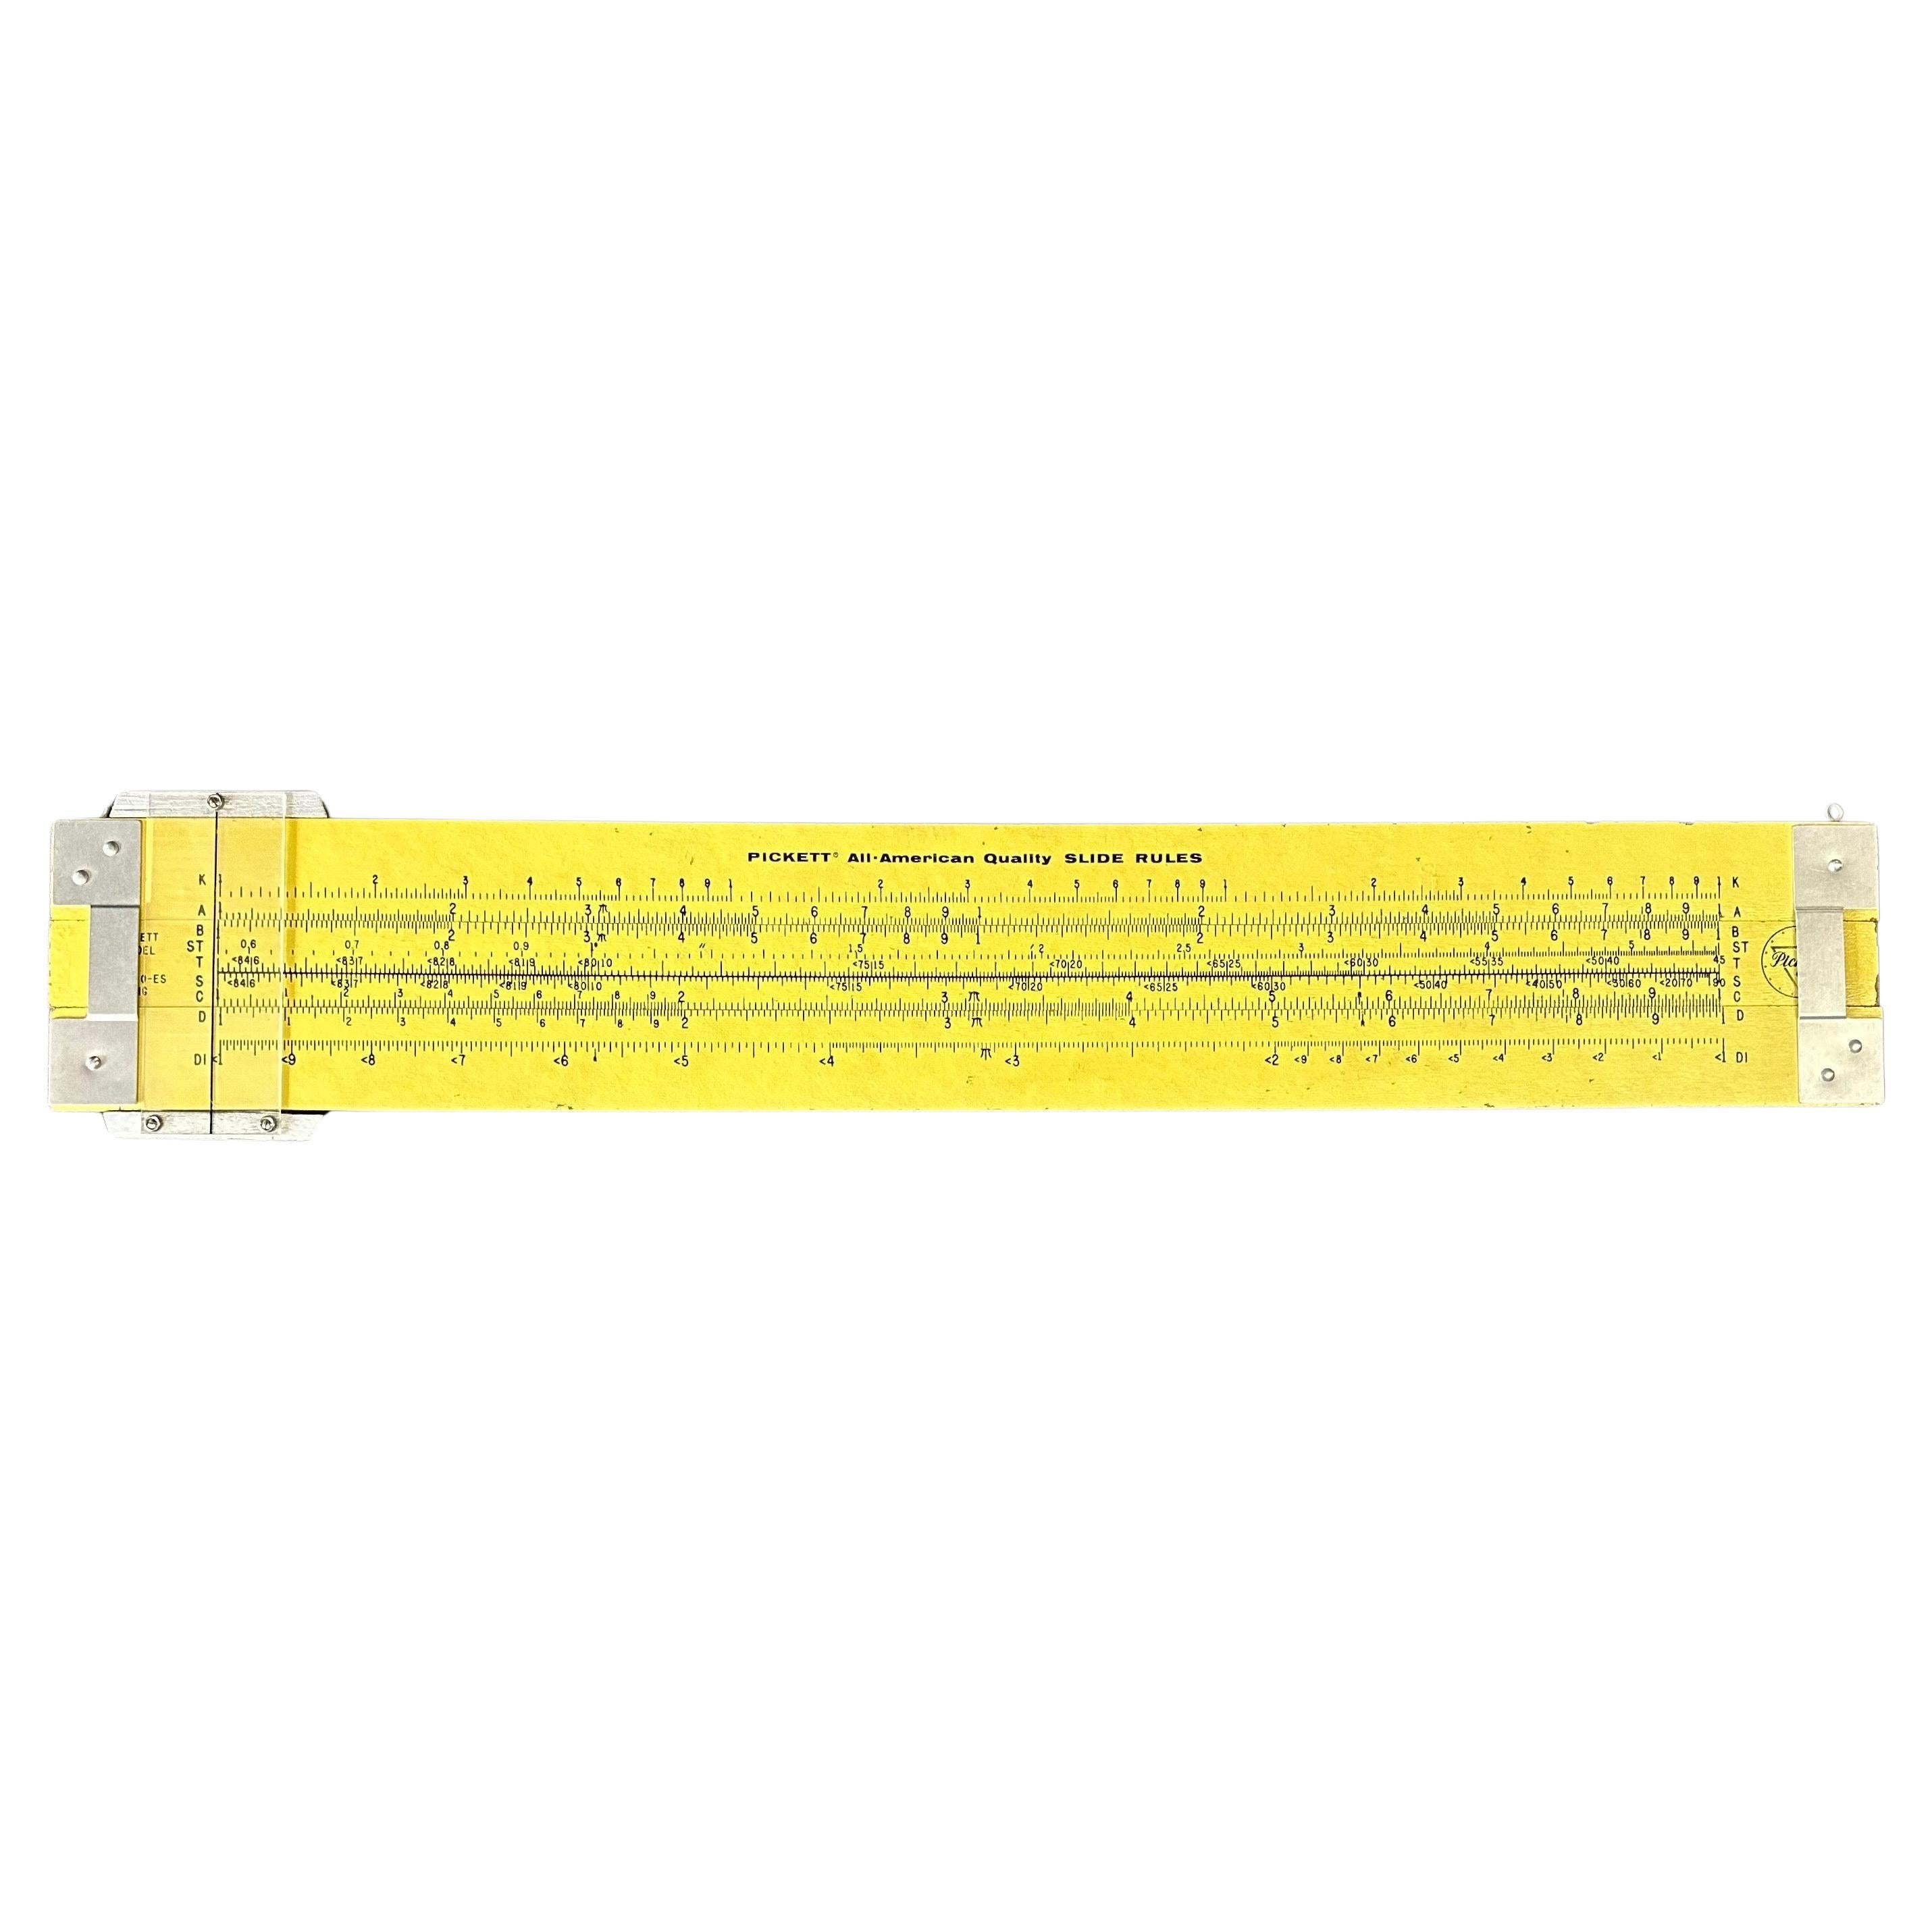 A unique vintage oversized 4' industrial slide rule by Pickett, circa 1960s.  The slide rule is a working model that was most likely used in a school class room or as a display model.  It has two rings attached to the top for mounting, is made of